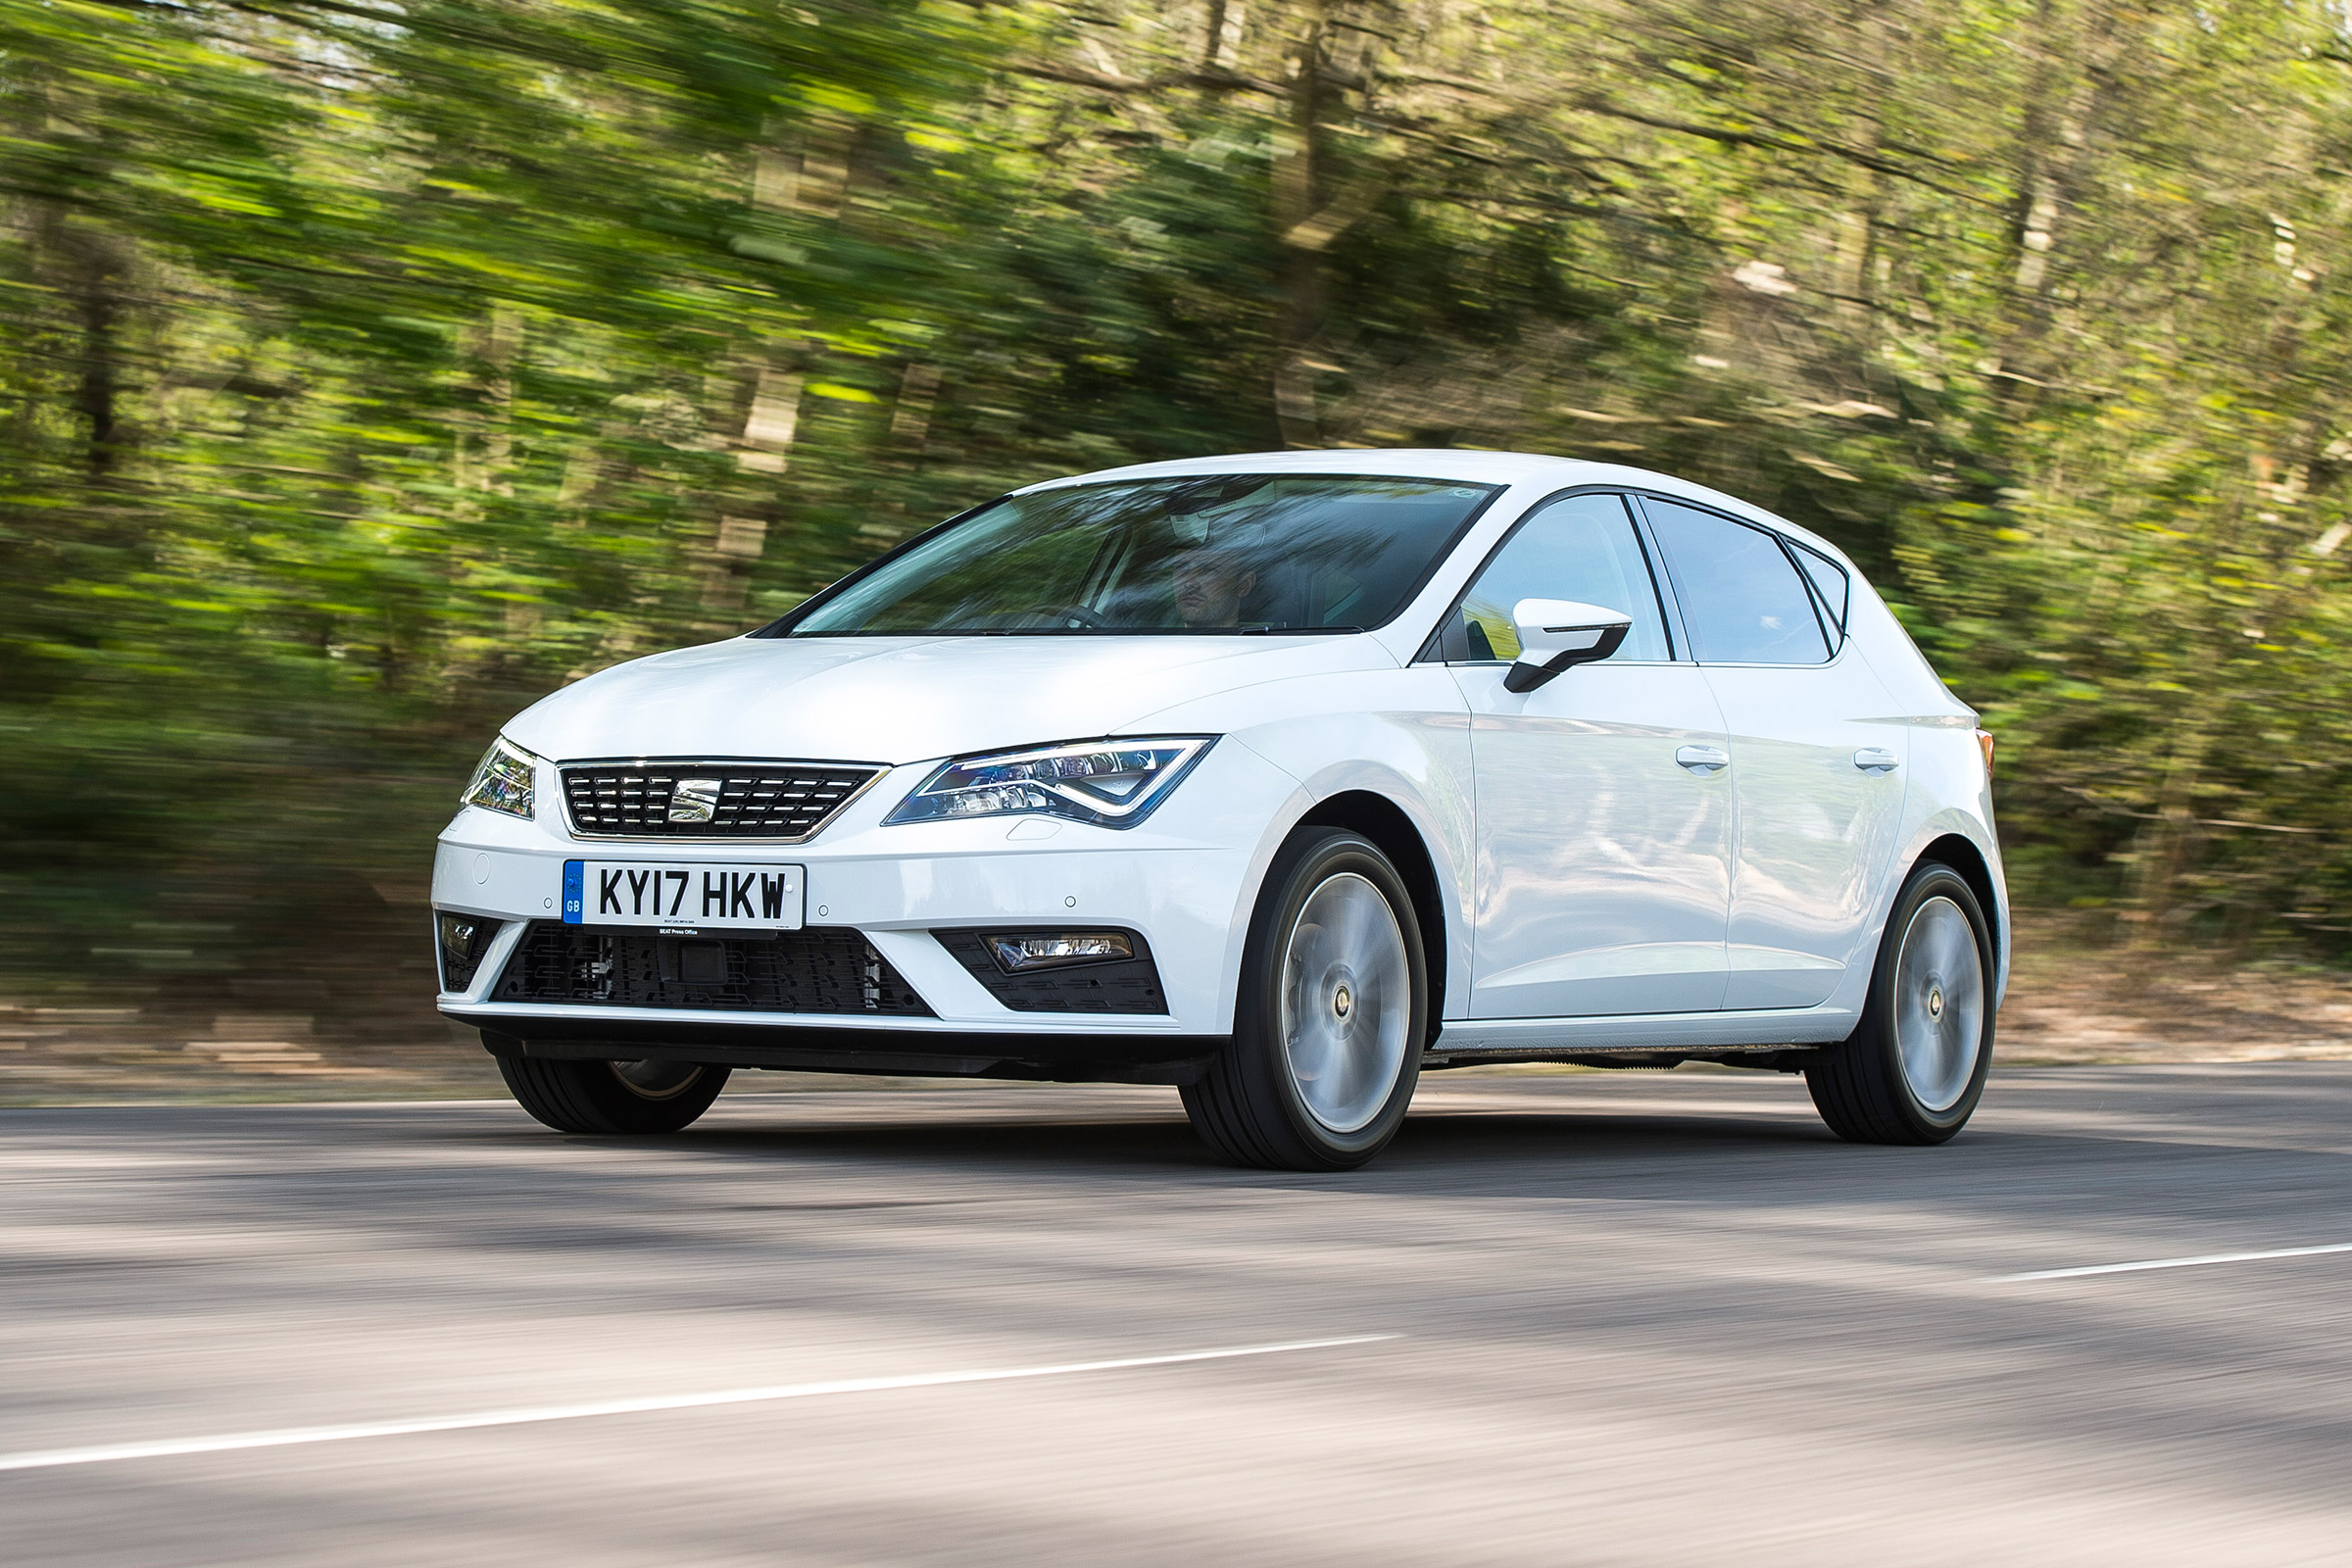 SEAT Leon review - prices, specs and 0-60 time